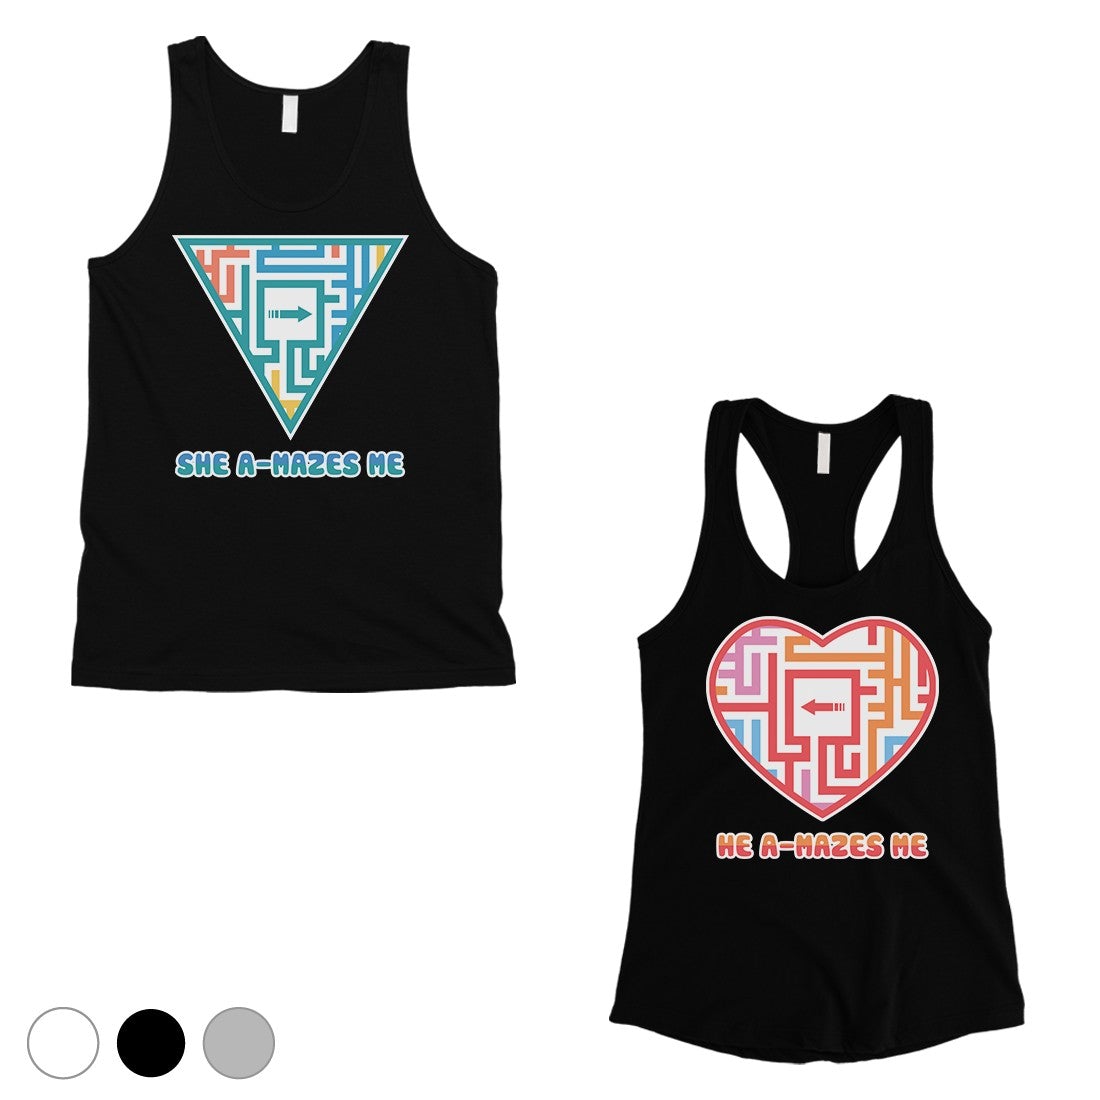 A-Mazes Me Matching Tank Tops For Couples